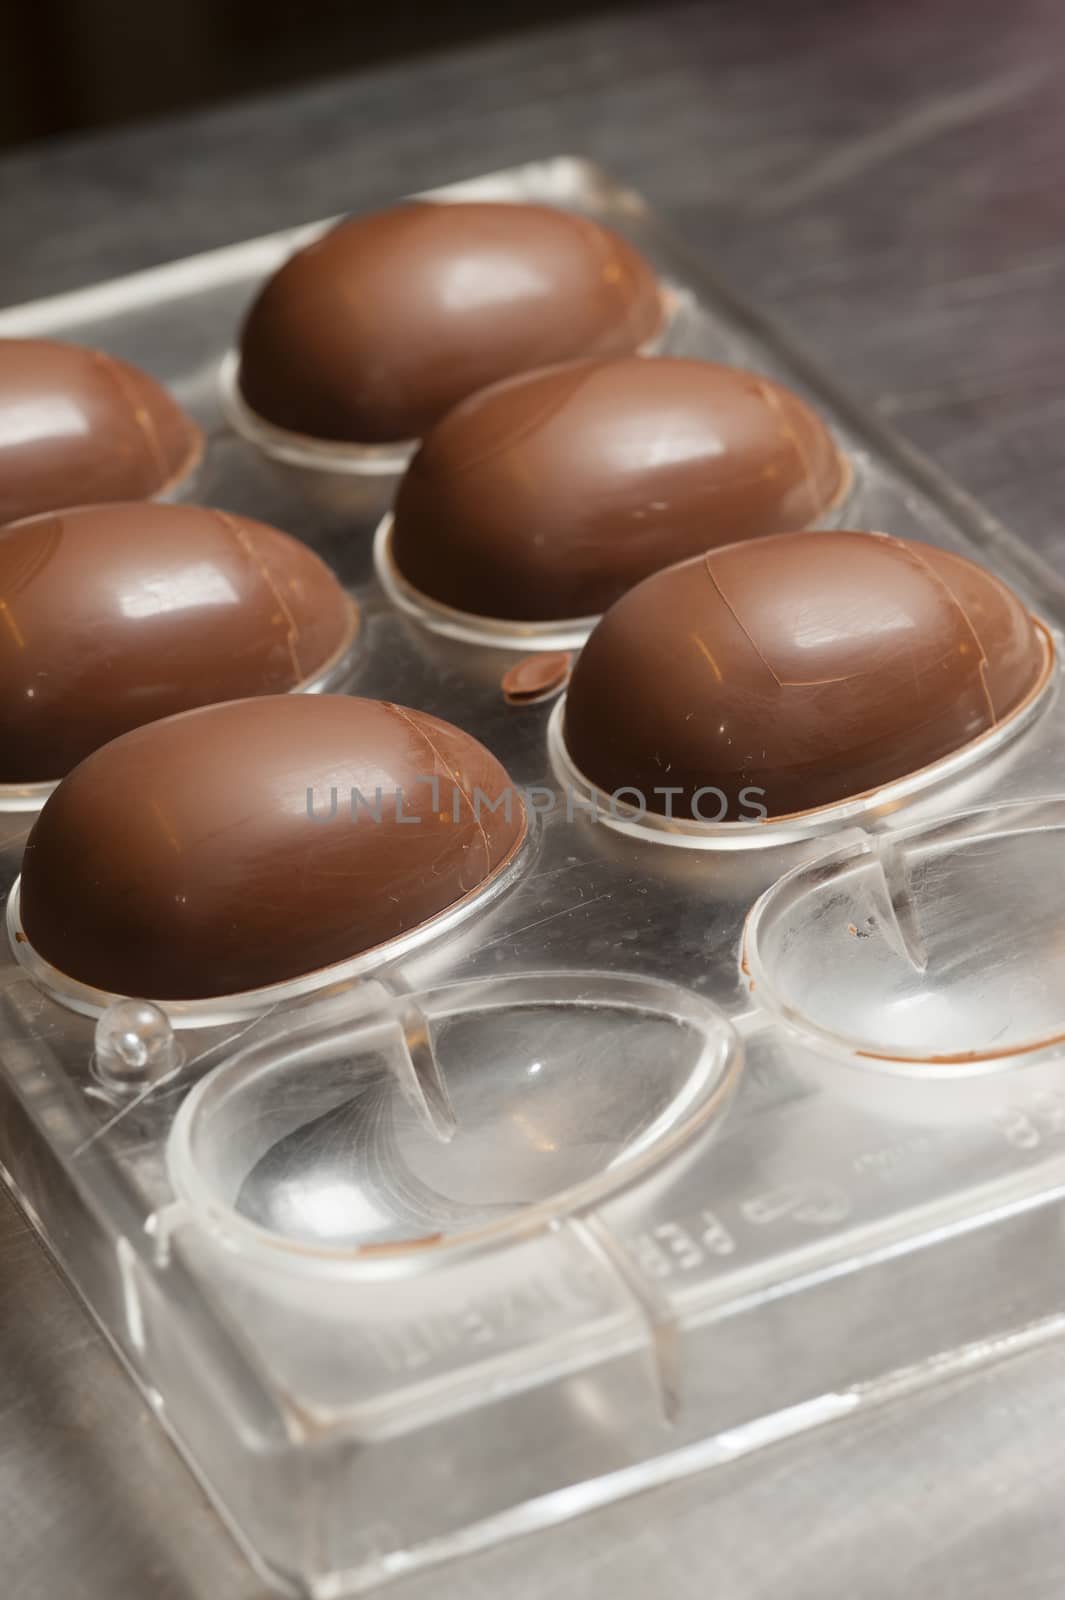 Ingredients and preparation of italian Easter milk and dark choccolate eggs and sweets